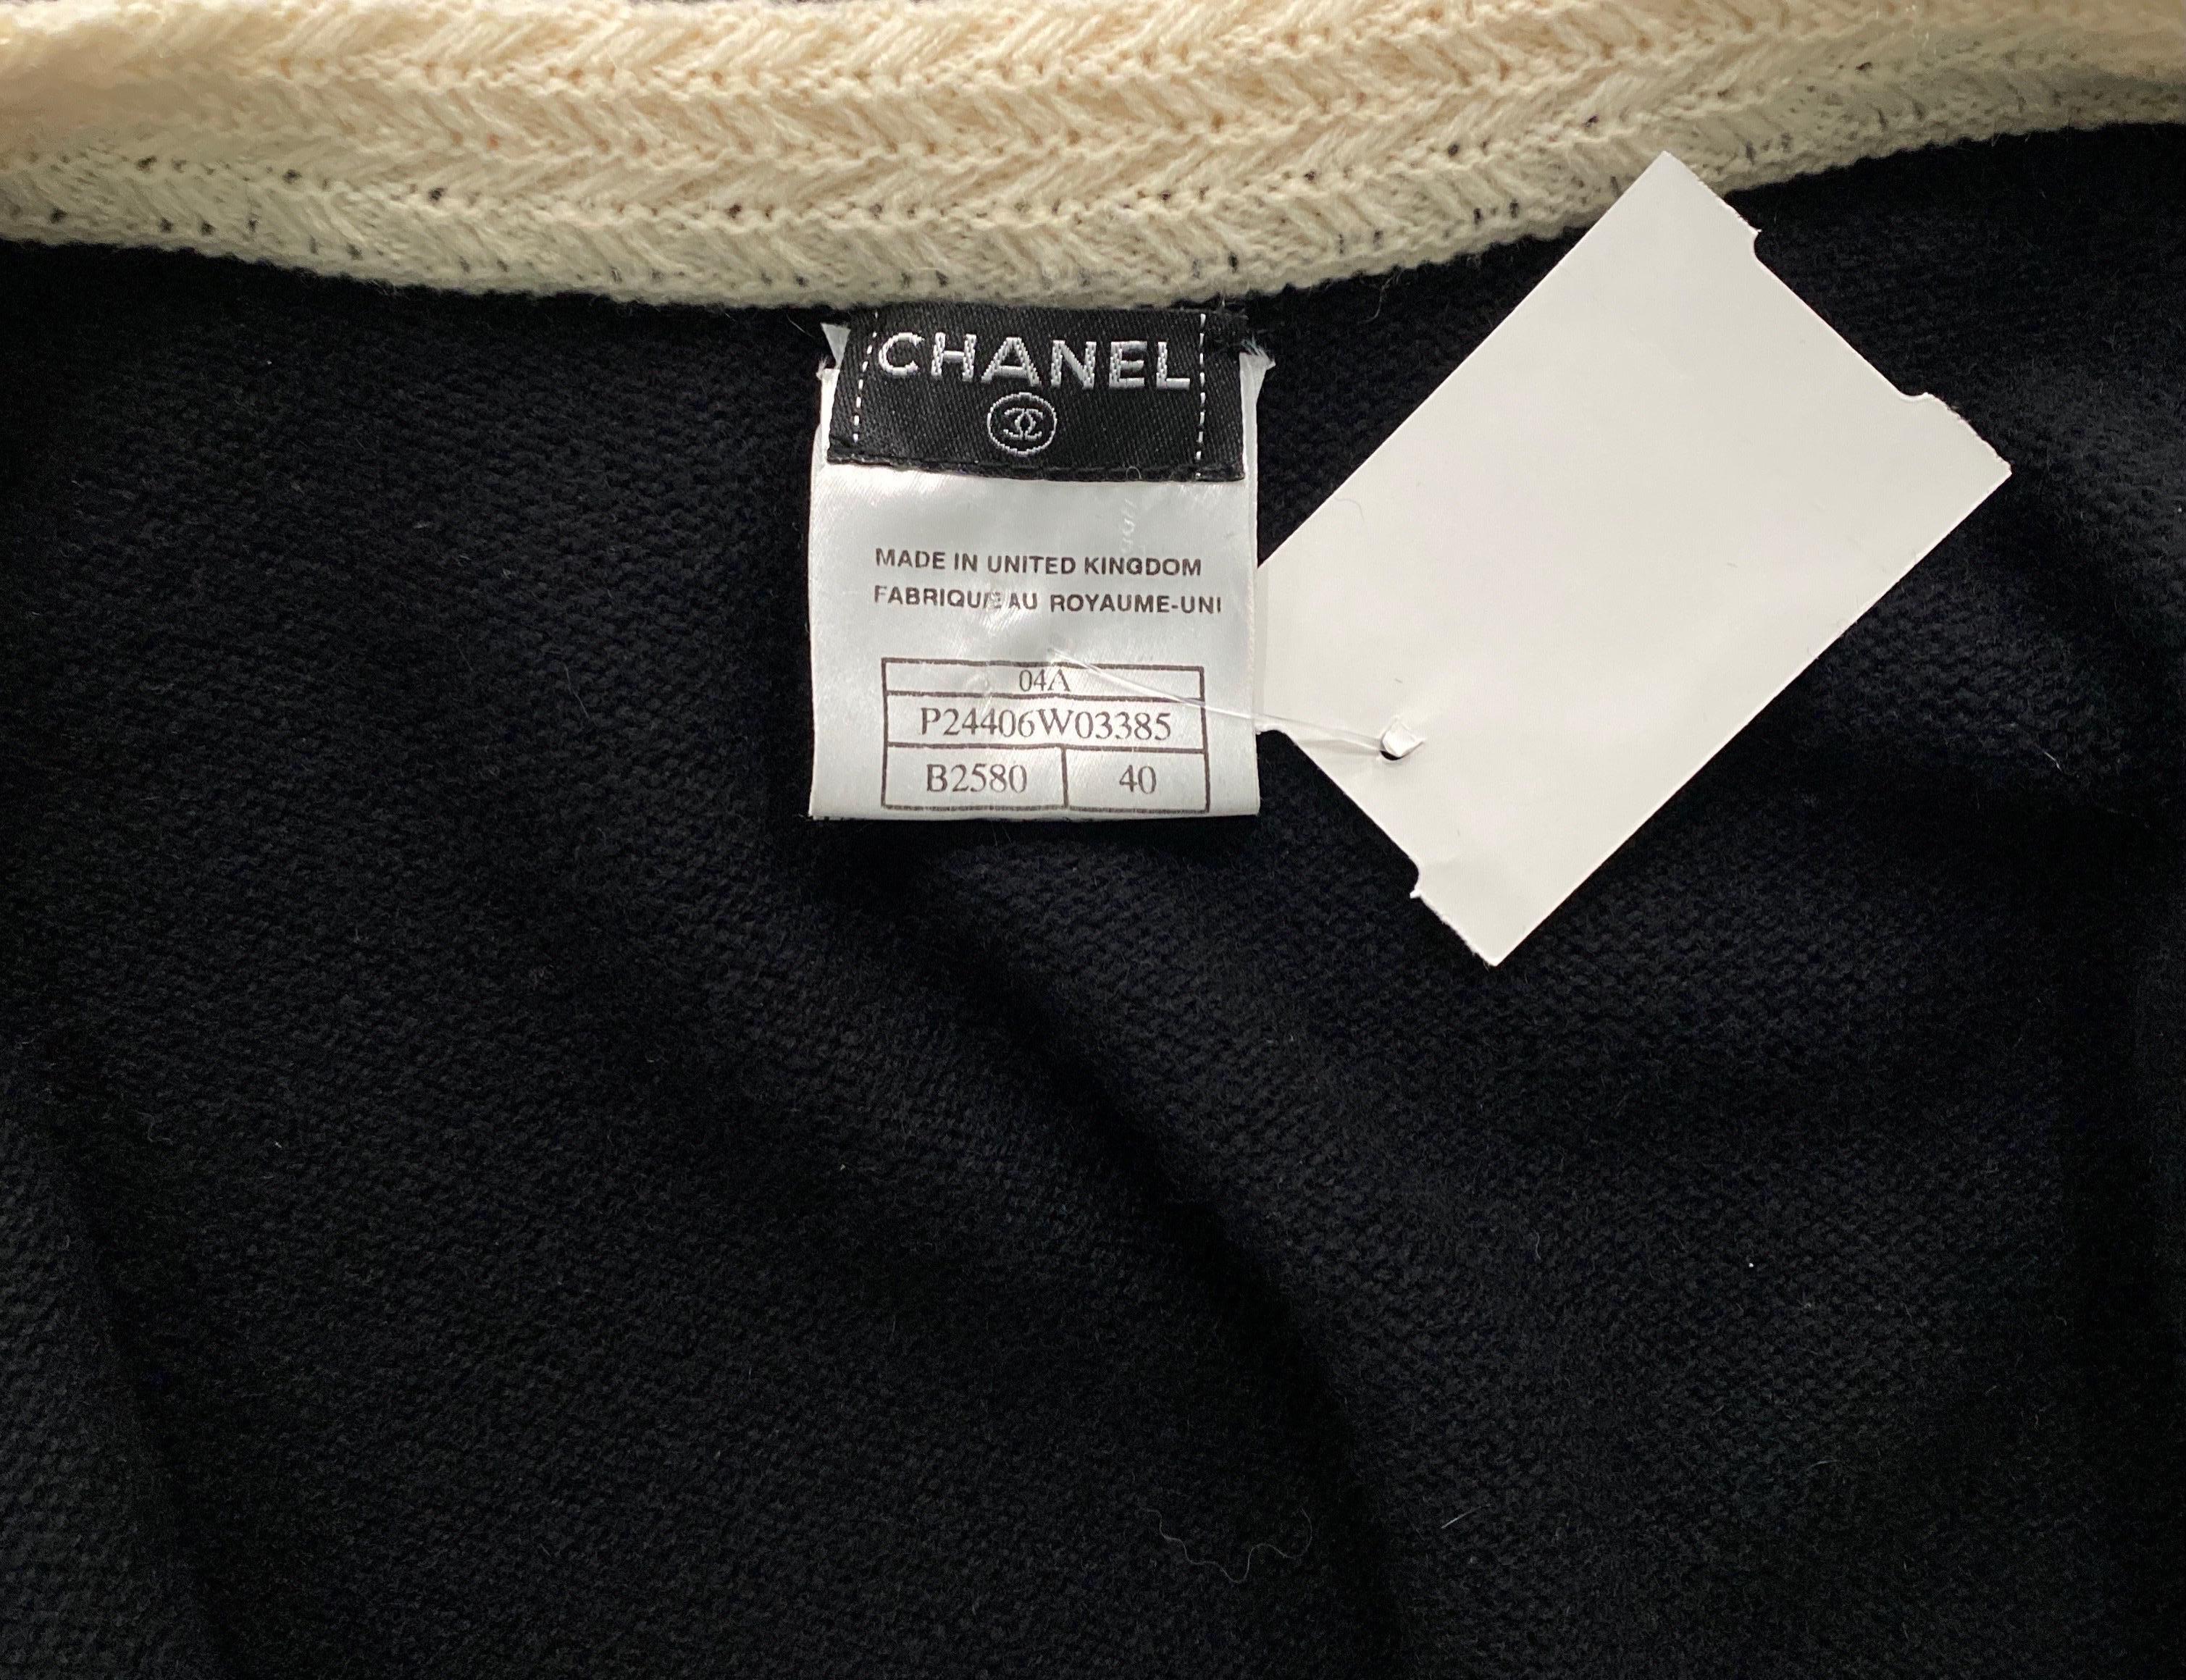 Chanel Black and Cream Cashmere Coat -Size 40- 2004A 11